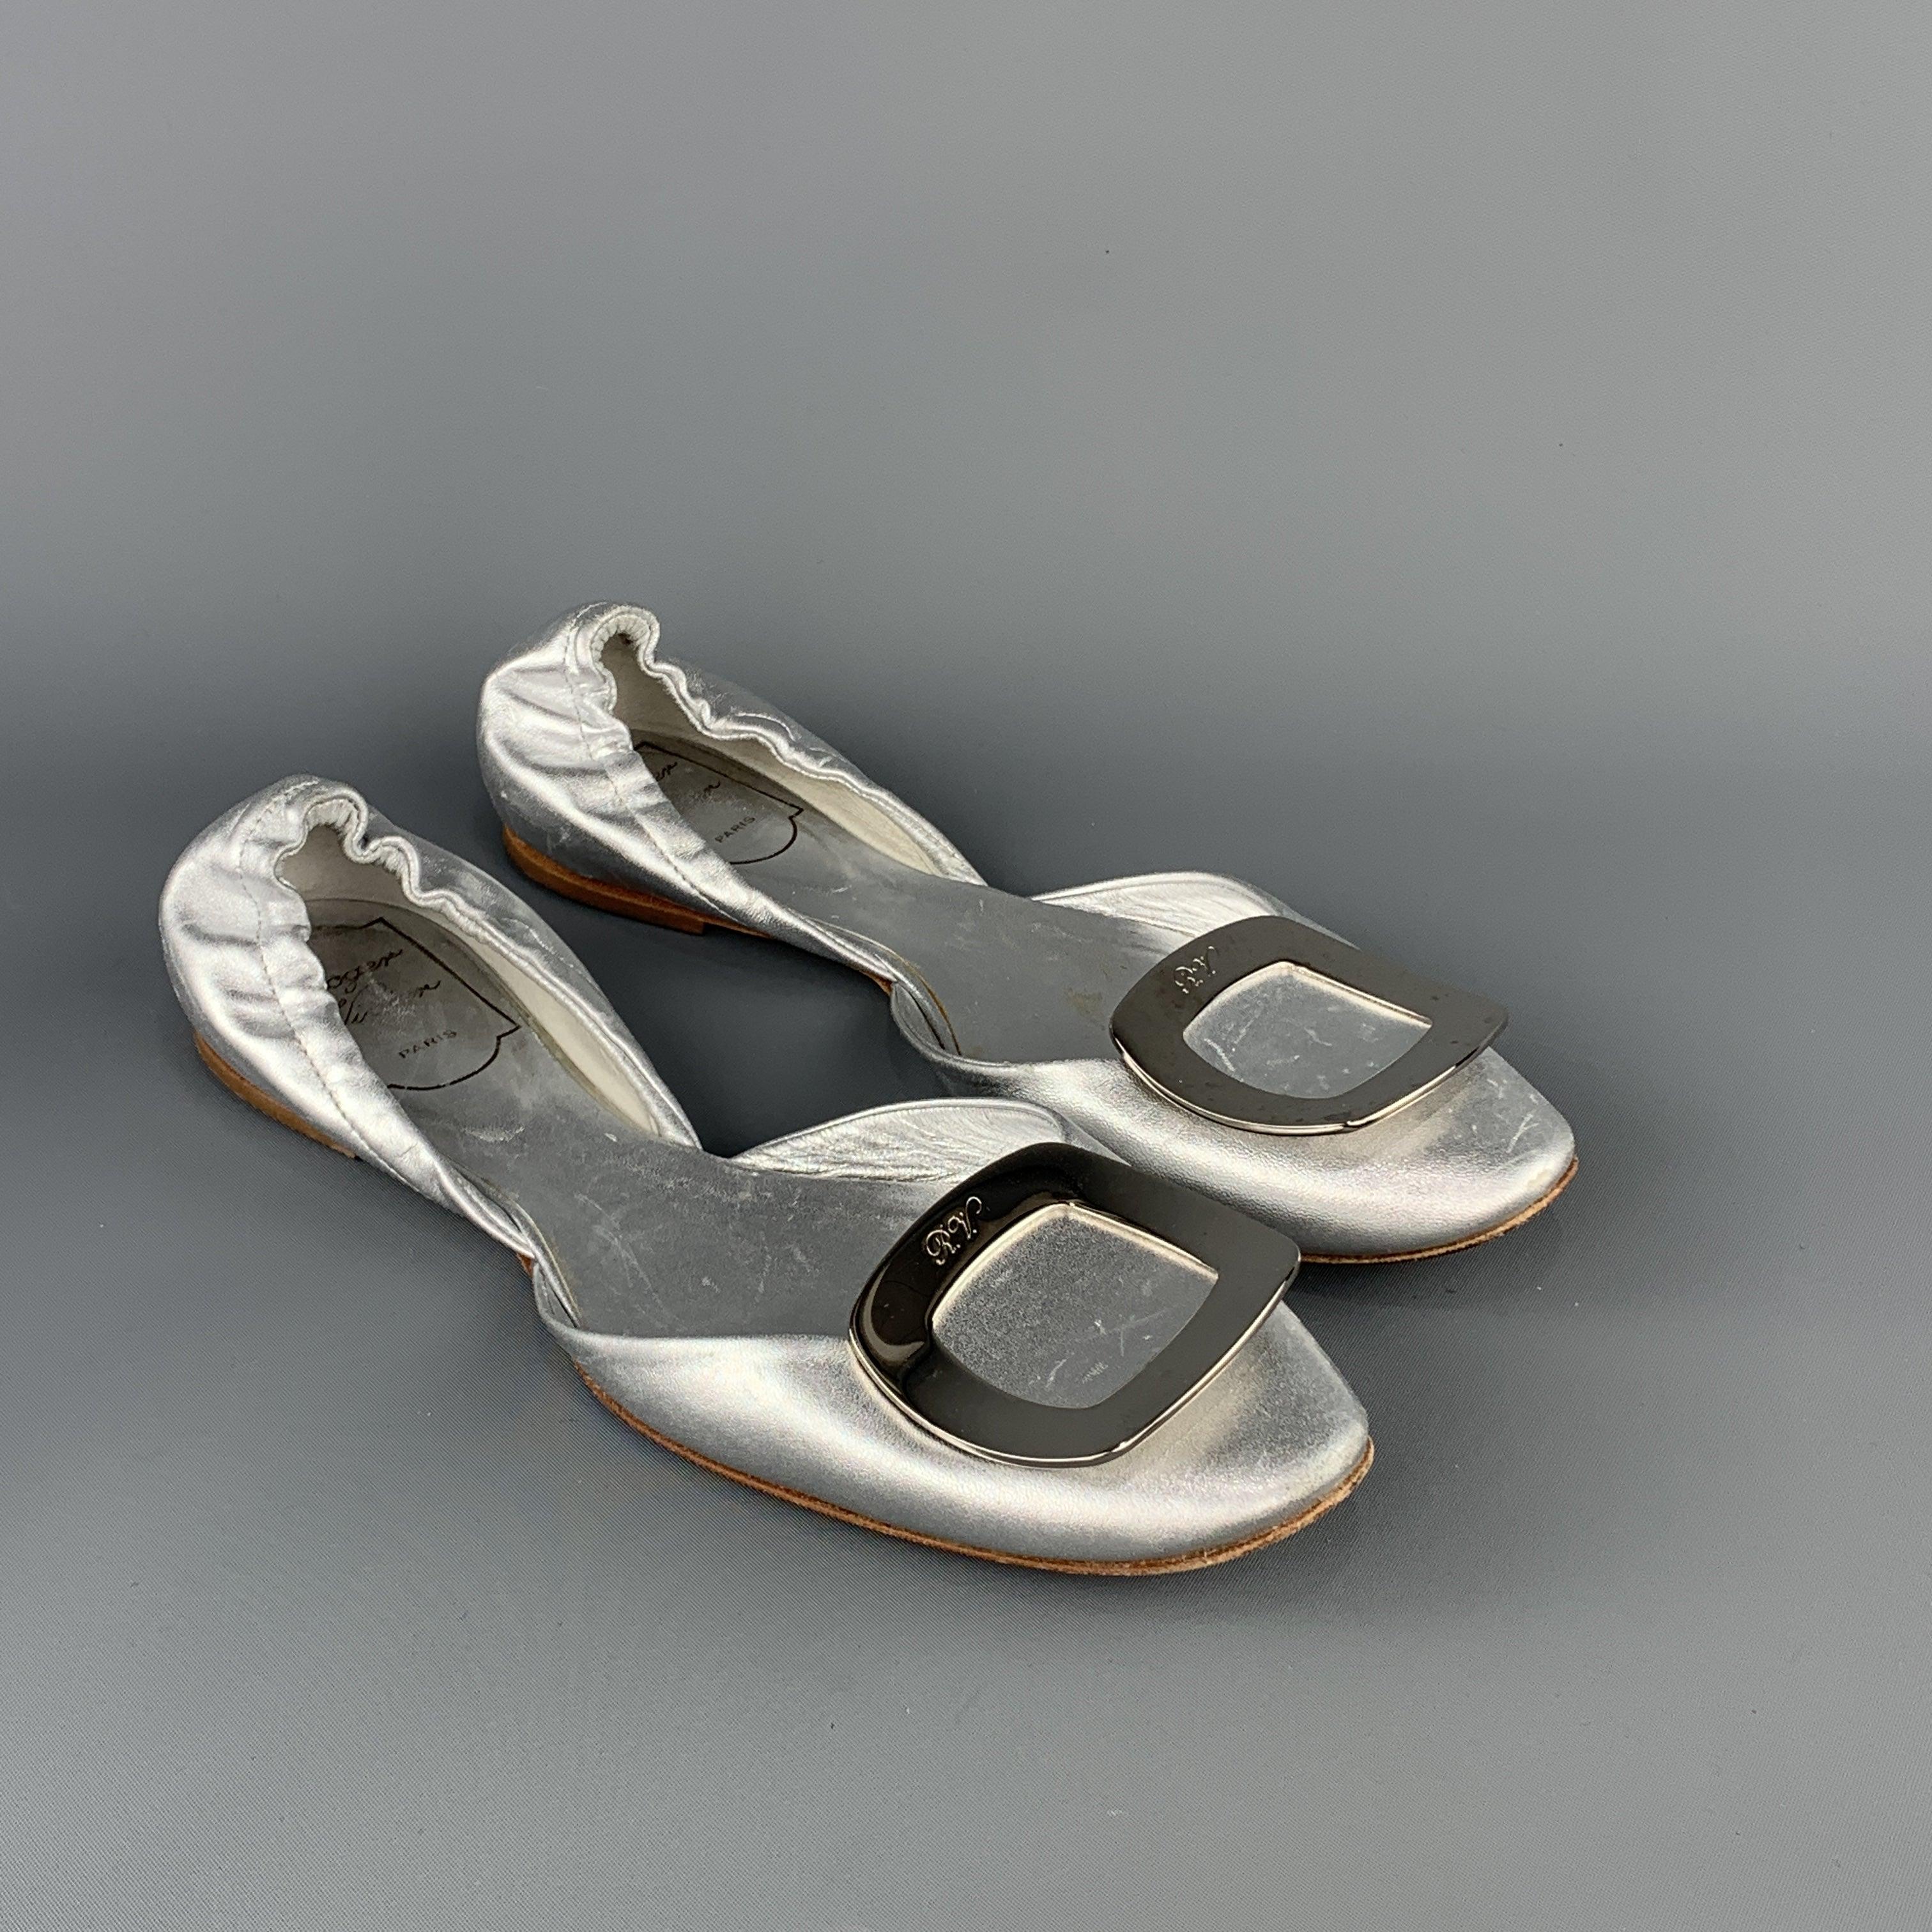 ROGER VIVIER D'orsay flats come in metallic silver leather with an oversived metal buckle. Made in Italy.
Good Pre-Owned Condition.
 

Marked:   IT 36 1/2

  
  
  
 
Reference: 94126
Category: Flats
More Details
    
Brand:  ROGER VIVIER
Size: 